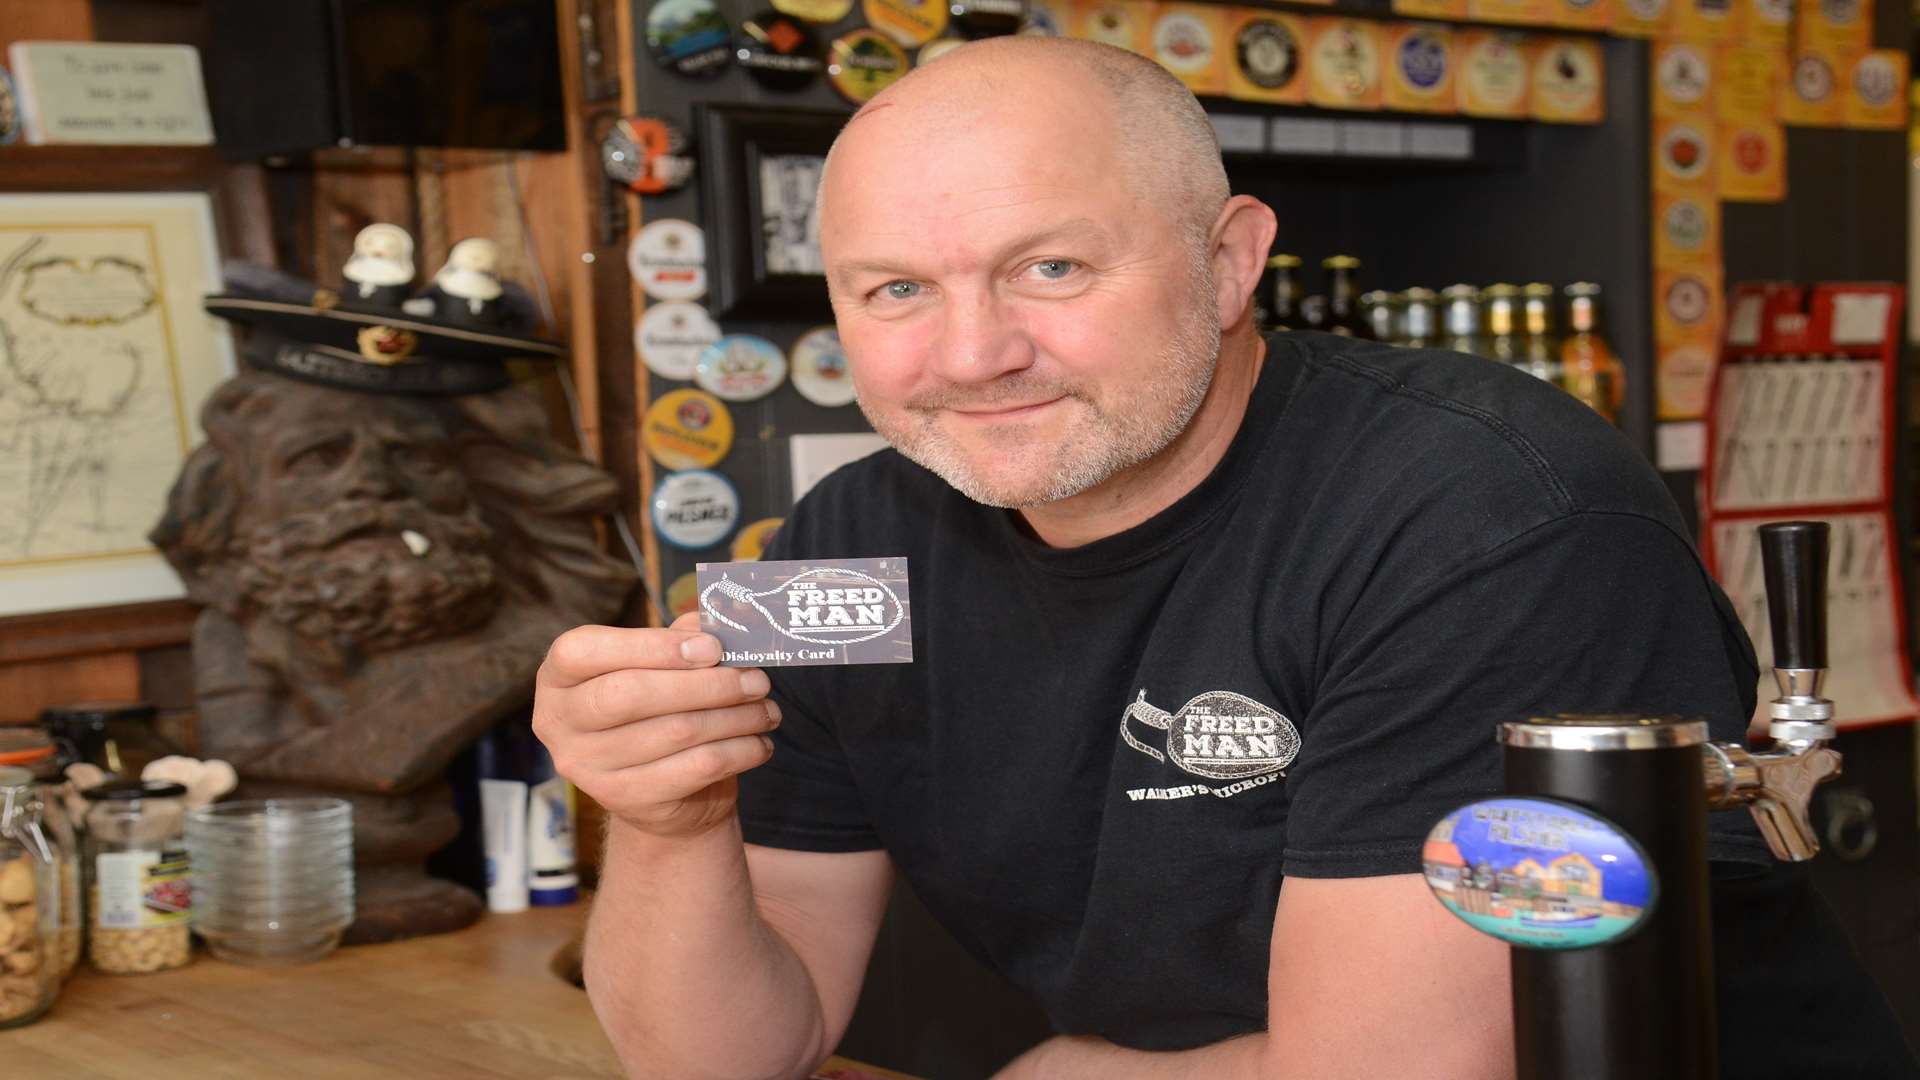 Ian Goodban who has devised a disloyalty card for his micro pub and customers who drink in different establishments